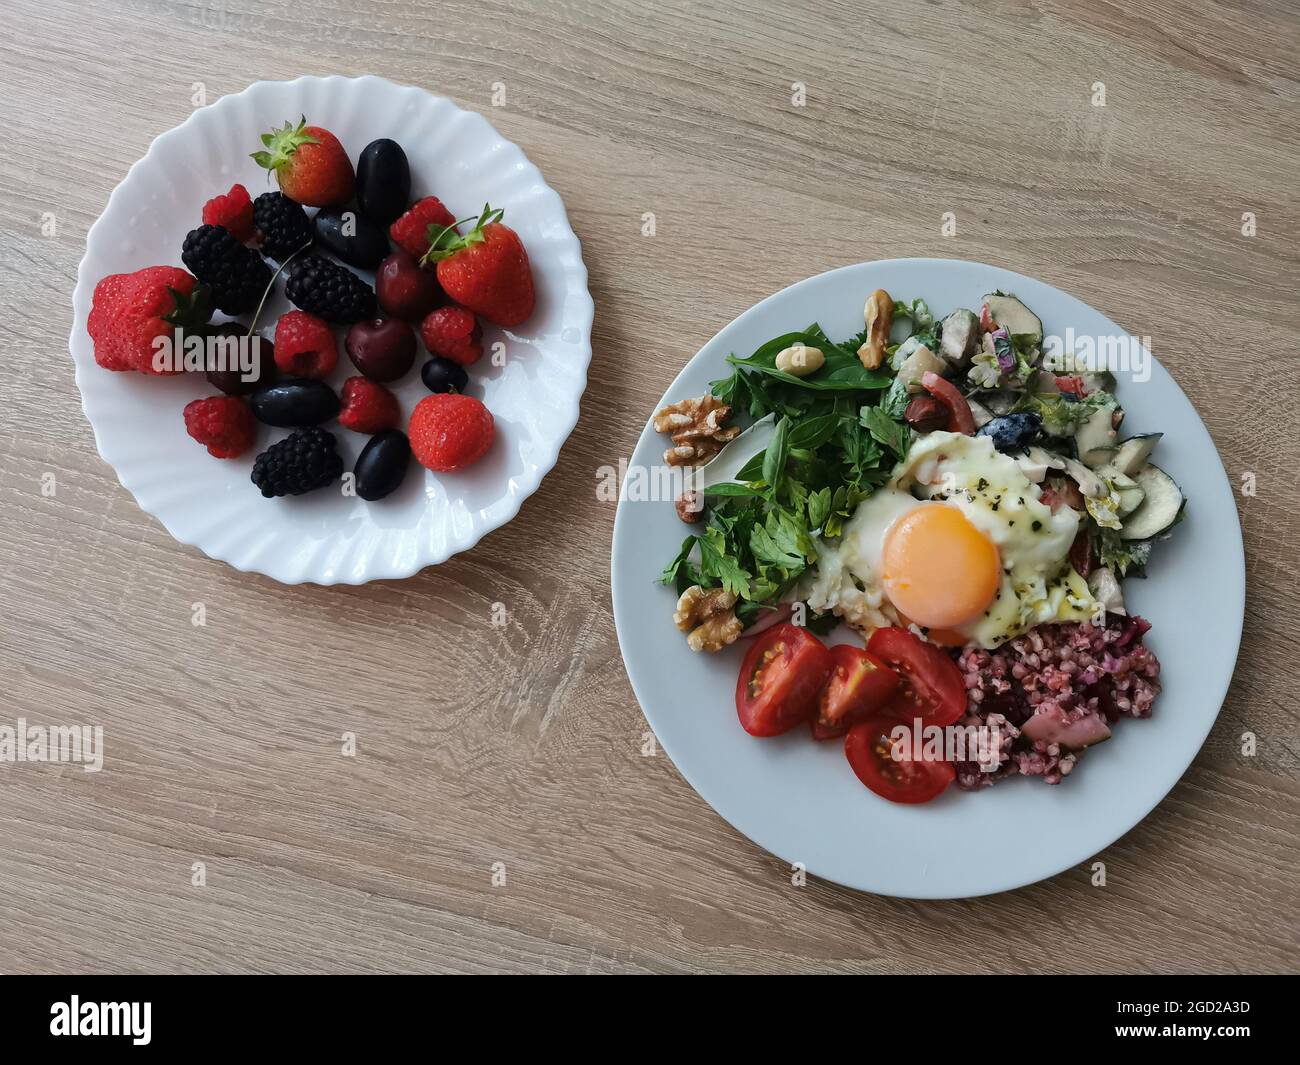 A healthy and tasty summer breakfast. Soft boiled egg, buckwheat groats, colorful vegetables, nuts  and berries Stock Photo